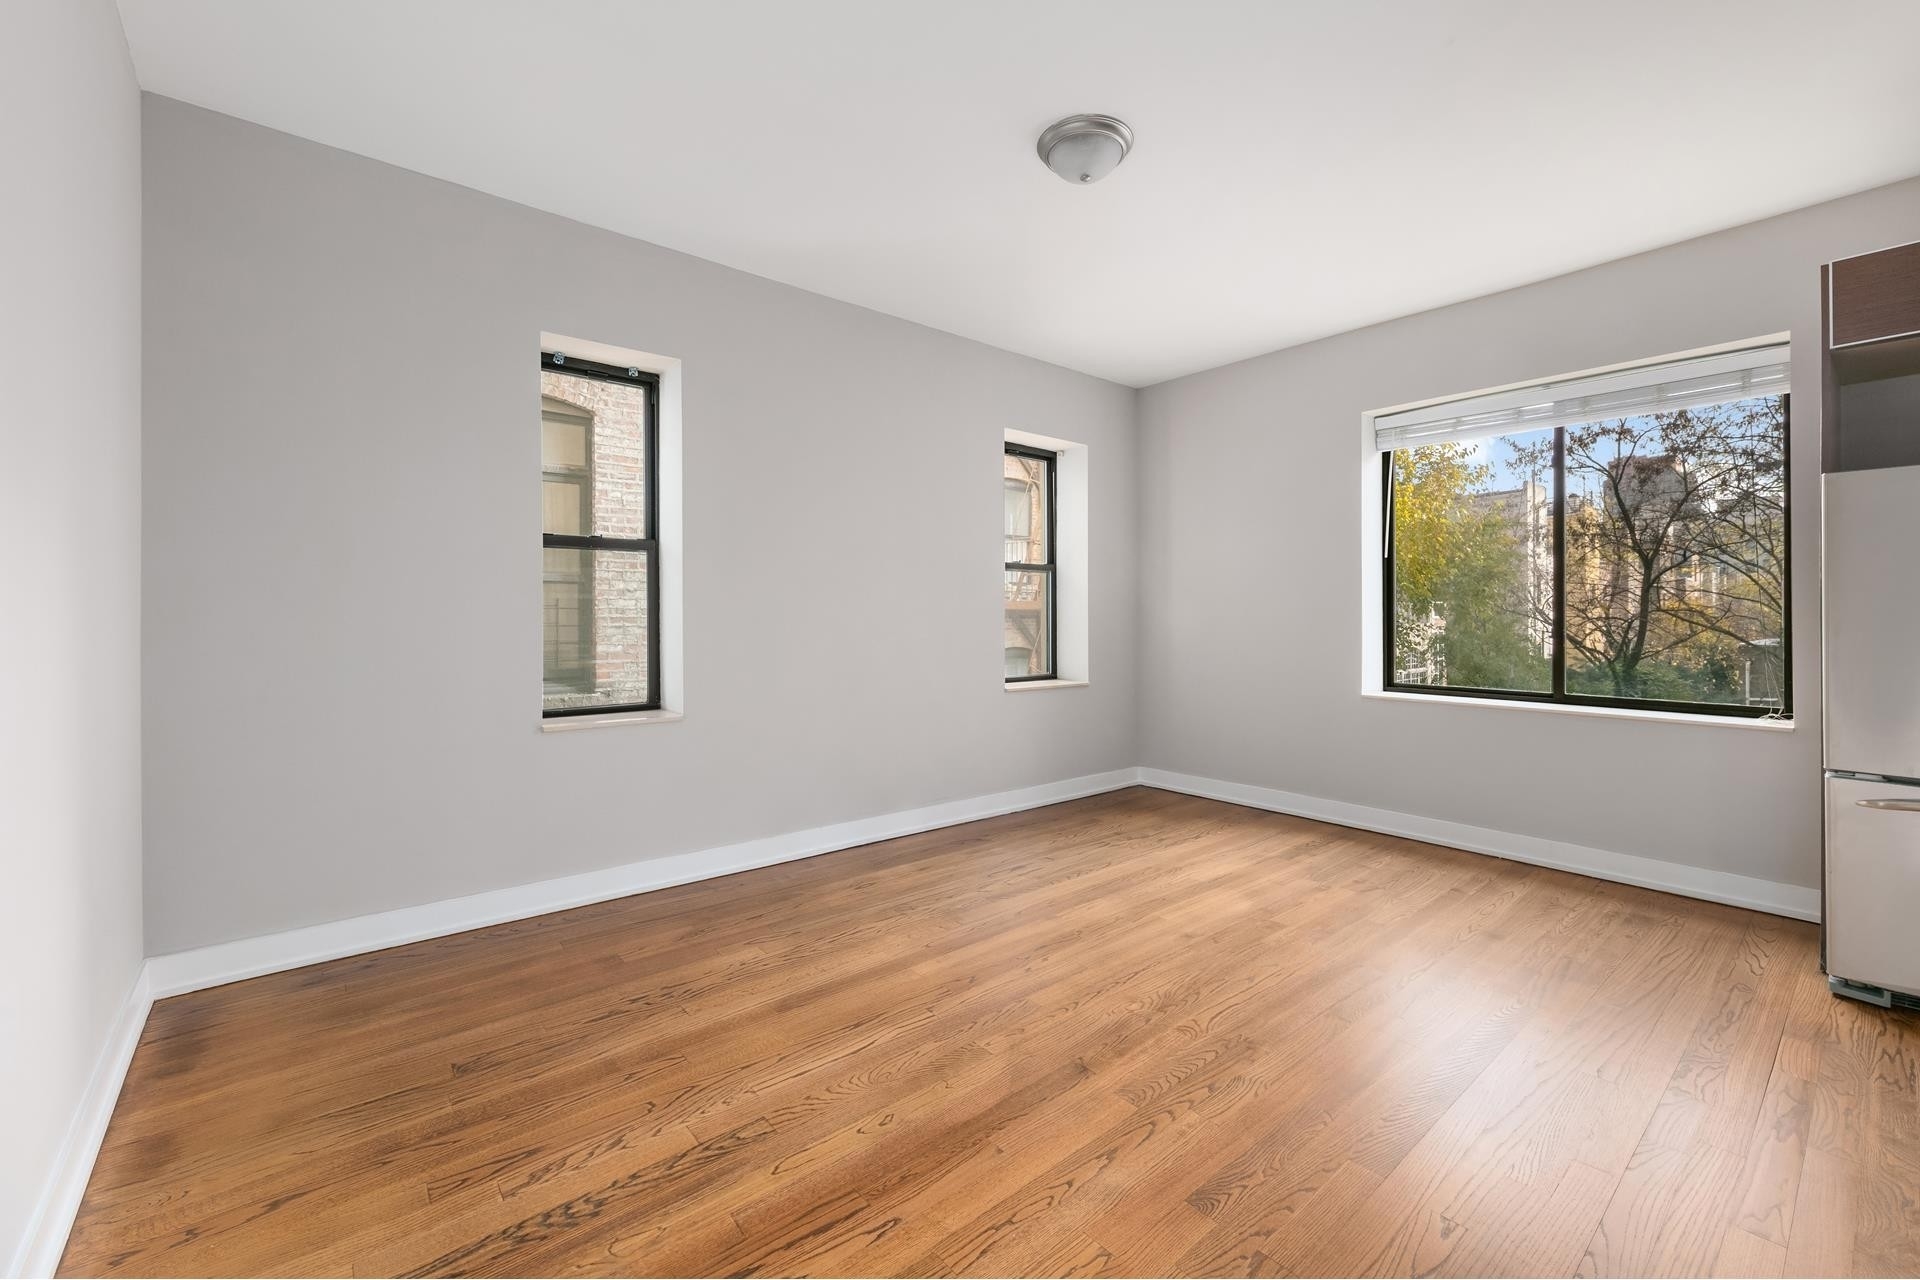 3. Condominiums for Sale at The Morellino, 159 W 118TH ST, 2D South Harlem, New York, NY 10026